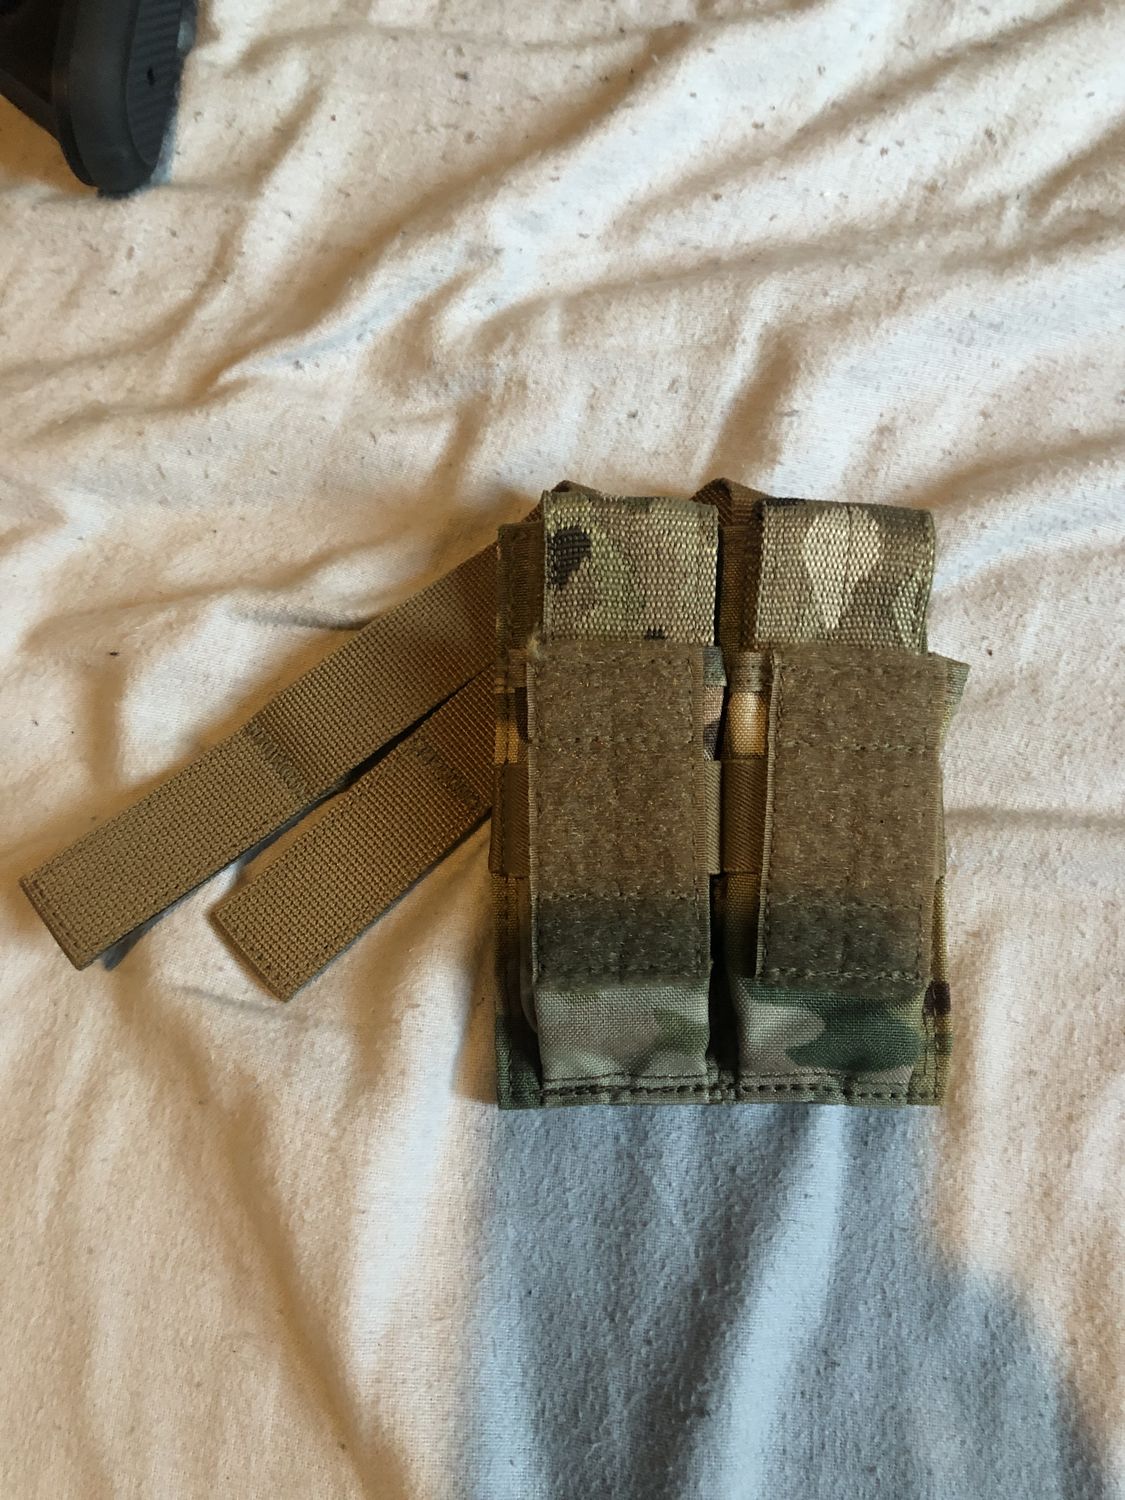 Double pistol mag pouch - Gear - Airsoft Forums UK